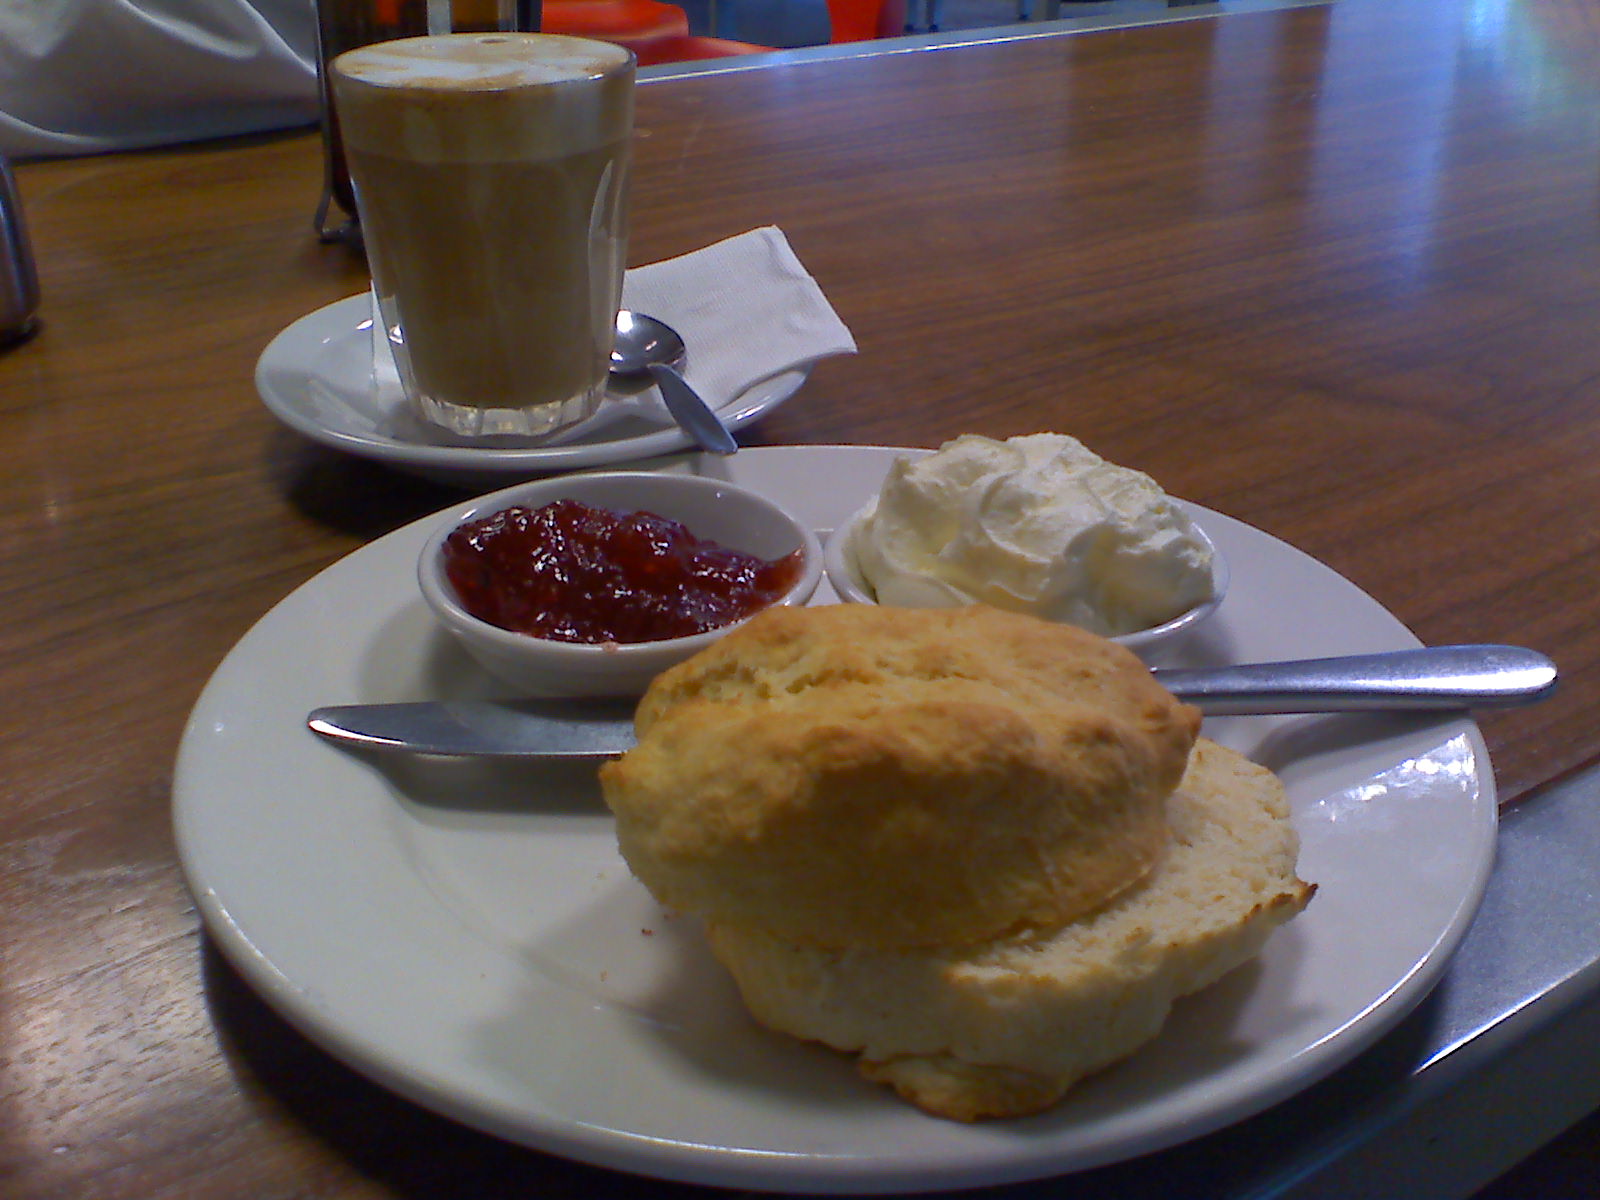 A white plate laden with a scone and a dish of jam and a dish of clotted cream with a glass cup filled with milky tea on a wooden tabletop.